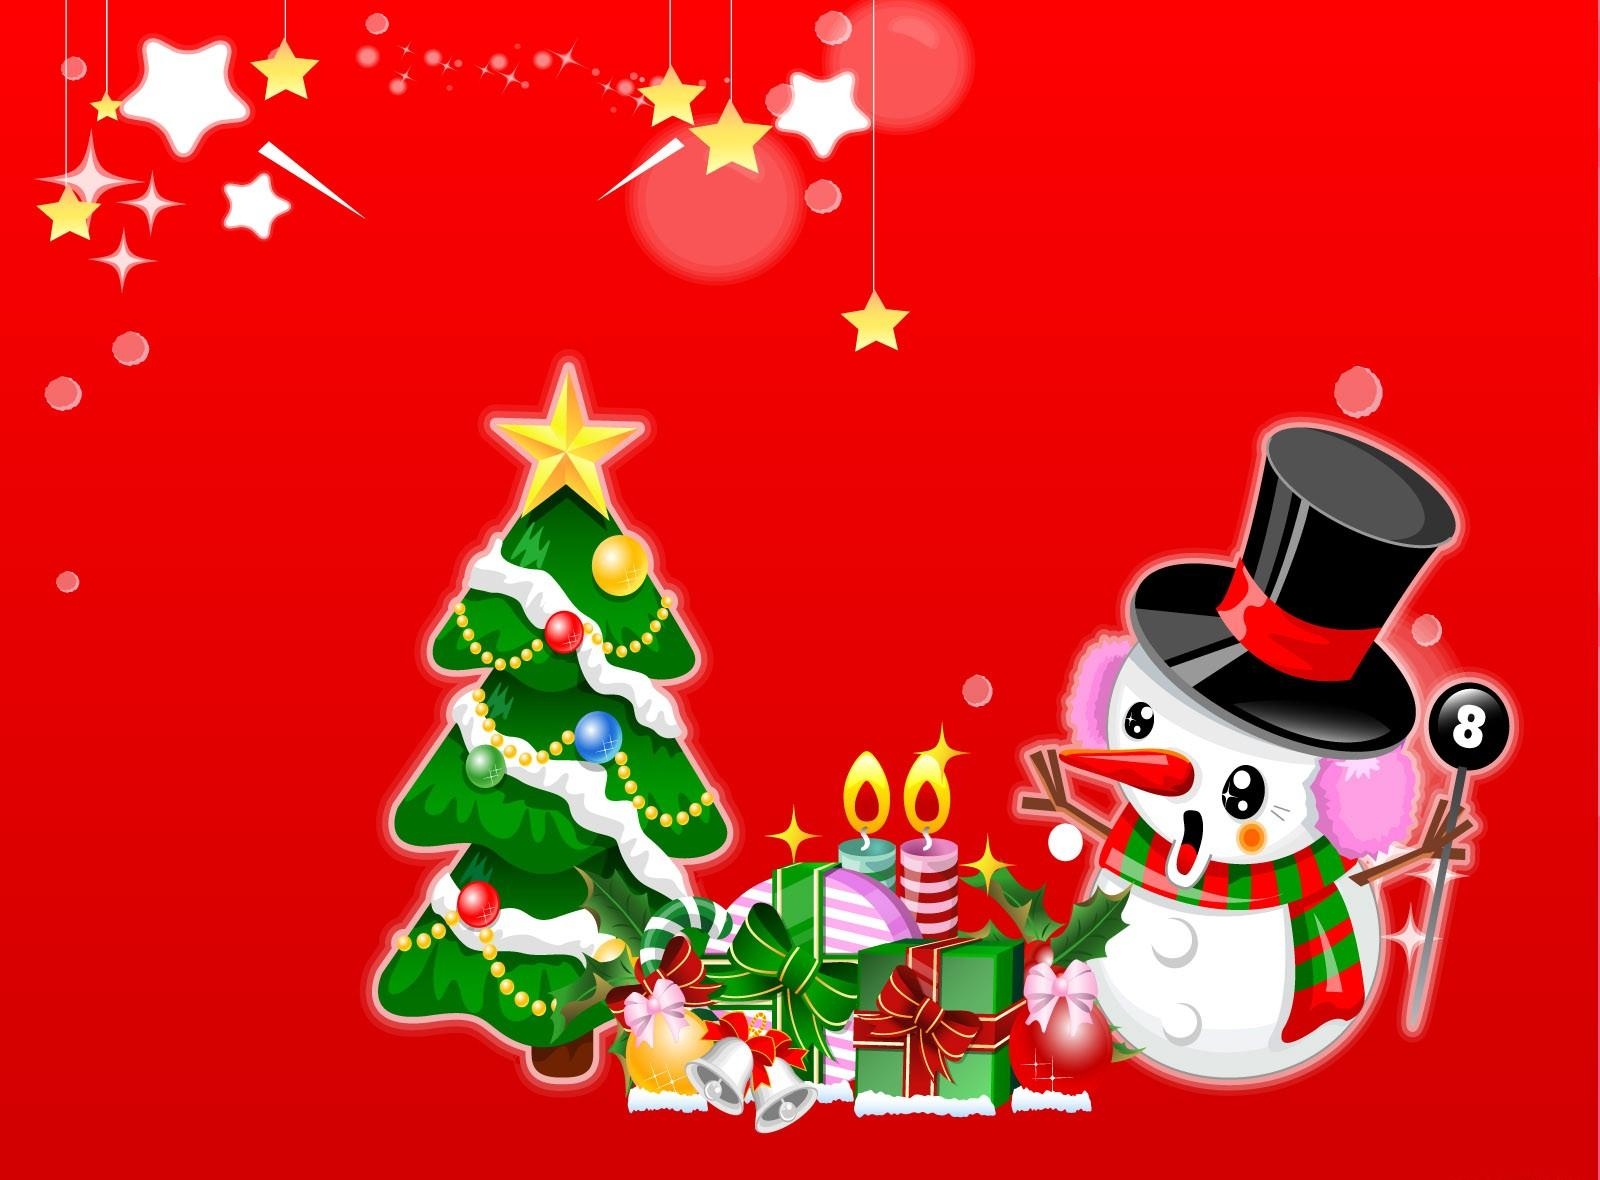 holidays, stars, candles, snowman, christmas tree, surprise, astonishment, presents, gifts